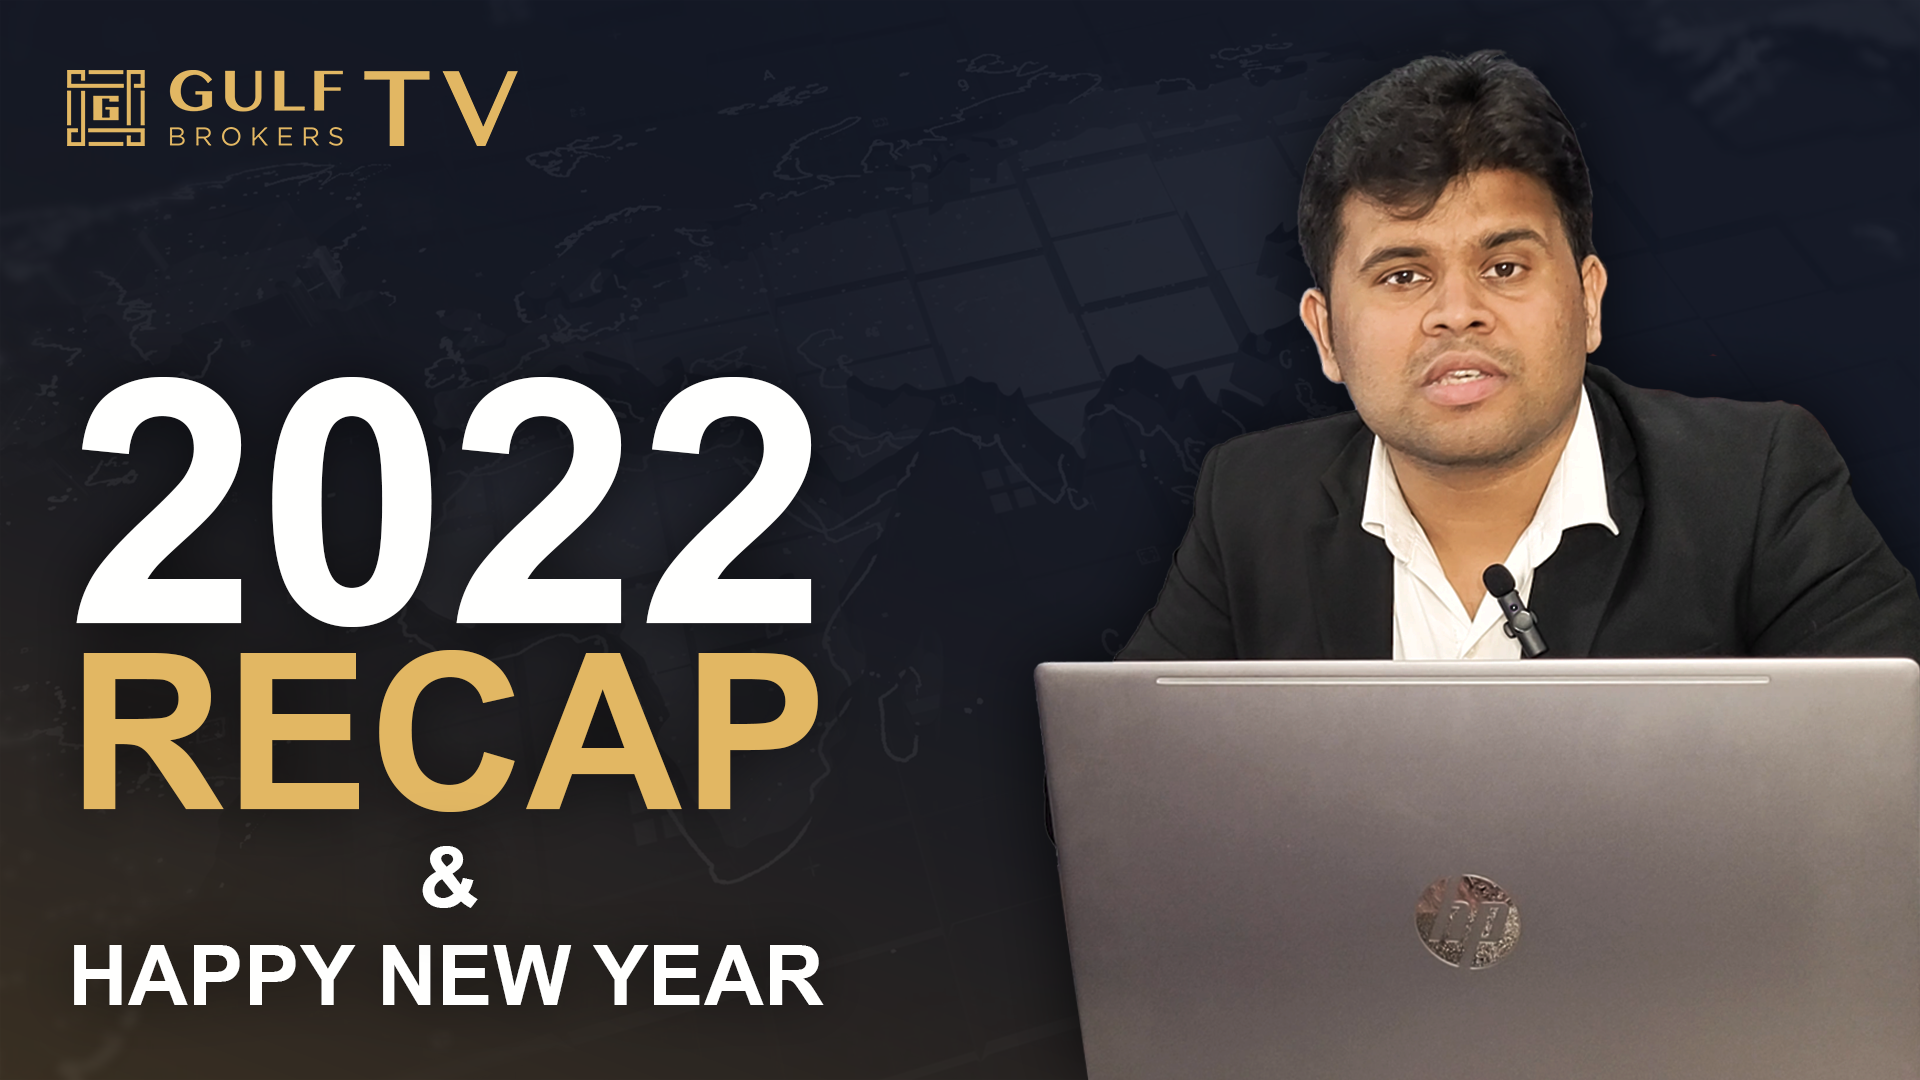 Gulfbrokers | Gulf Brokers | Review of the year 2022 | Syam KP